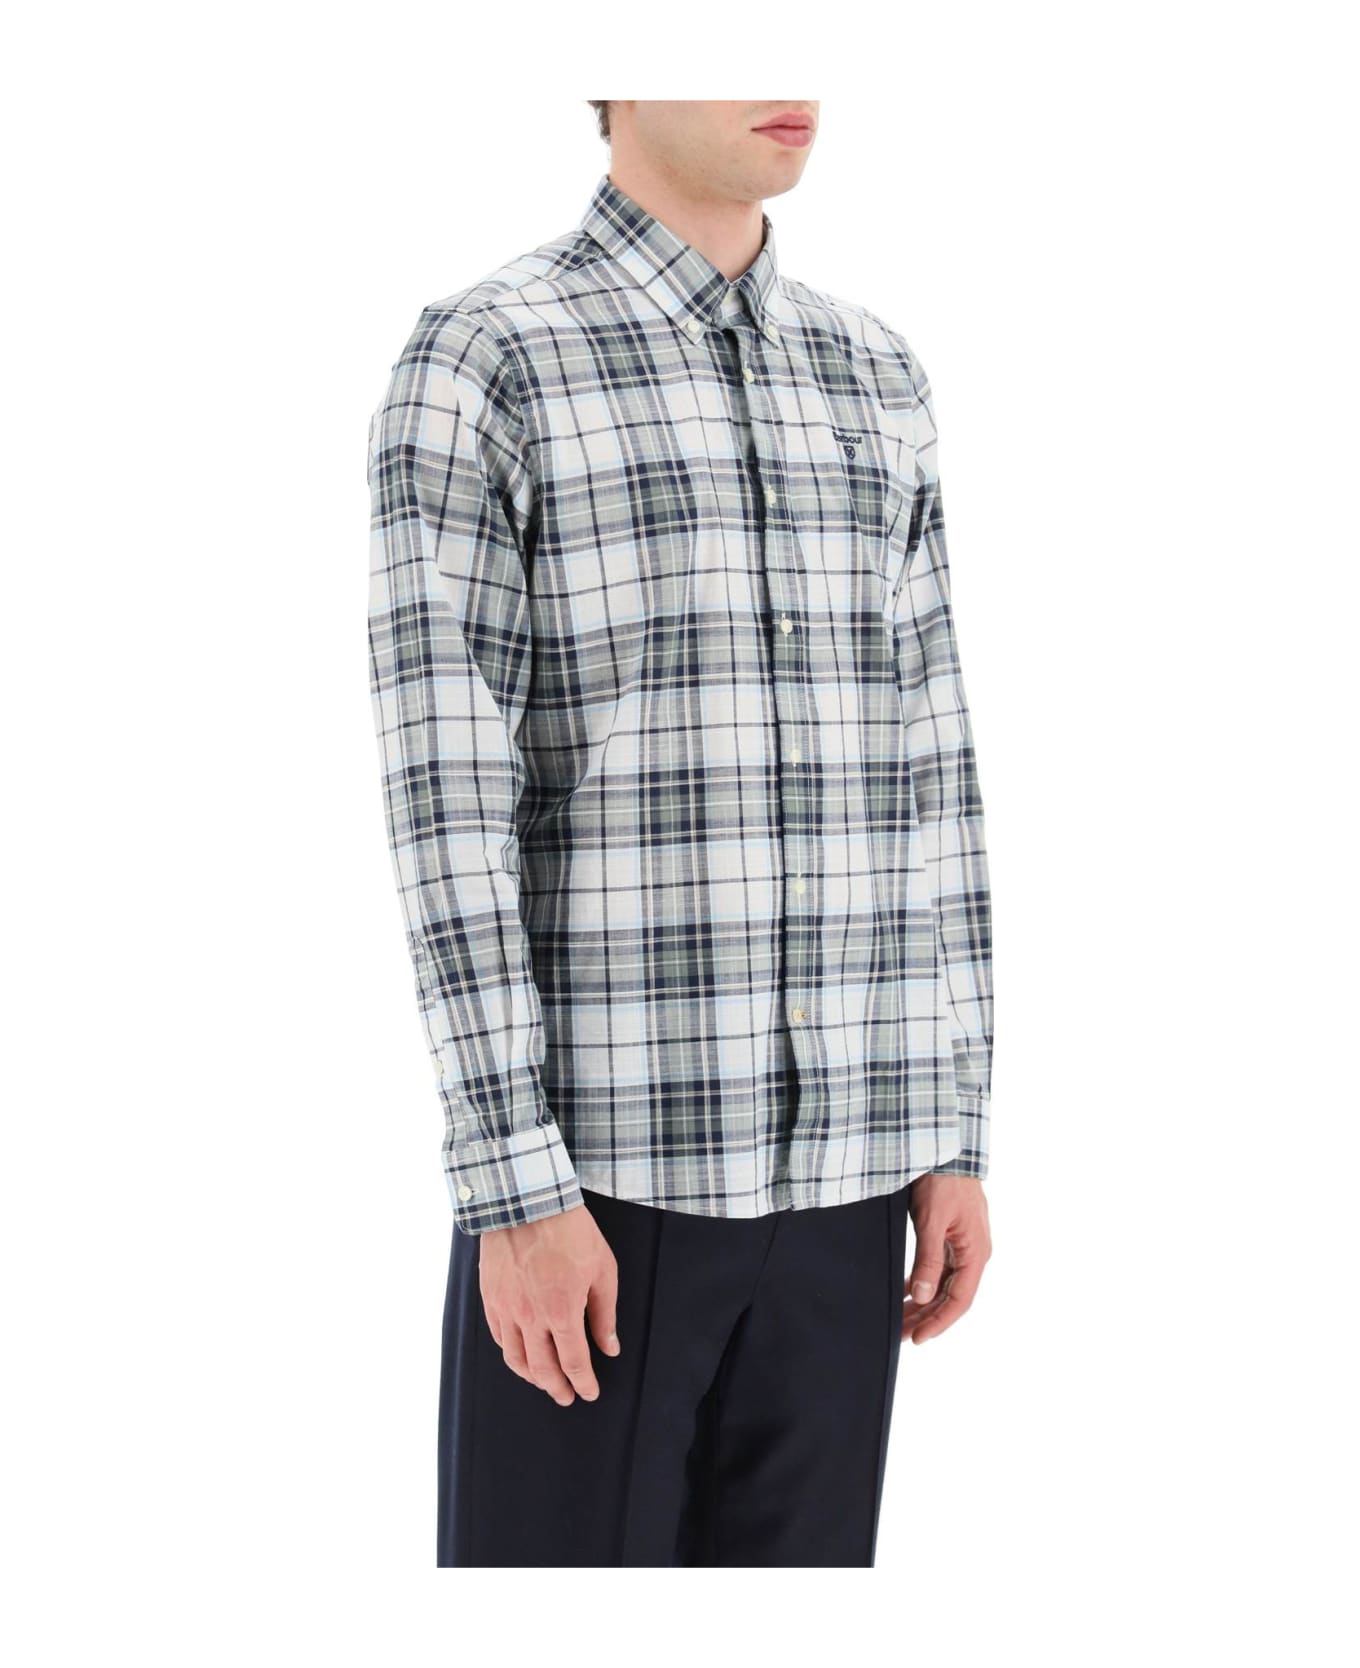 Barbour Multicolor Cotton Shirt - AGAVE GREEN シャツ